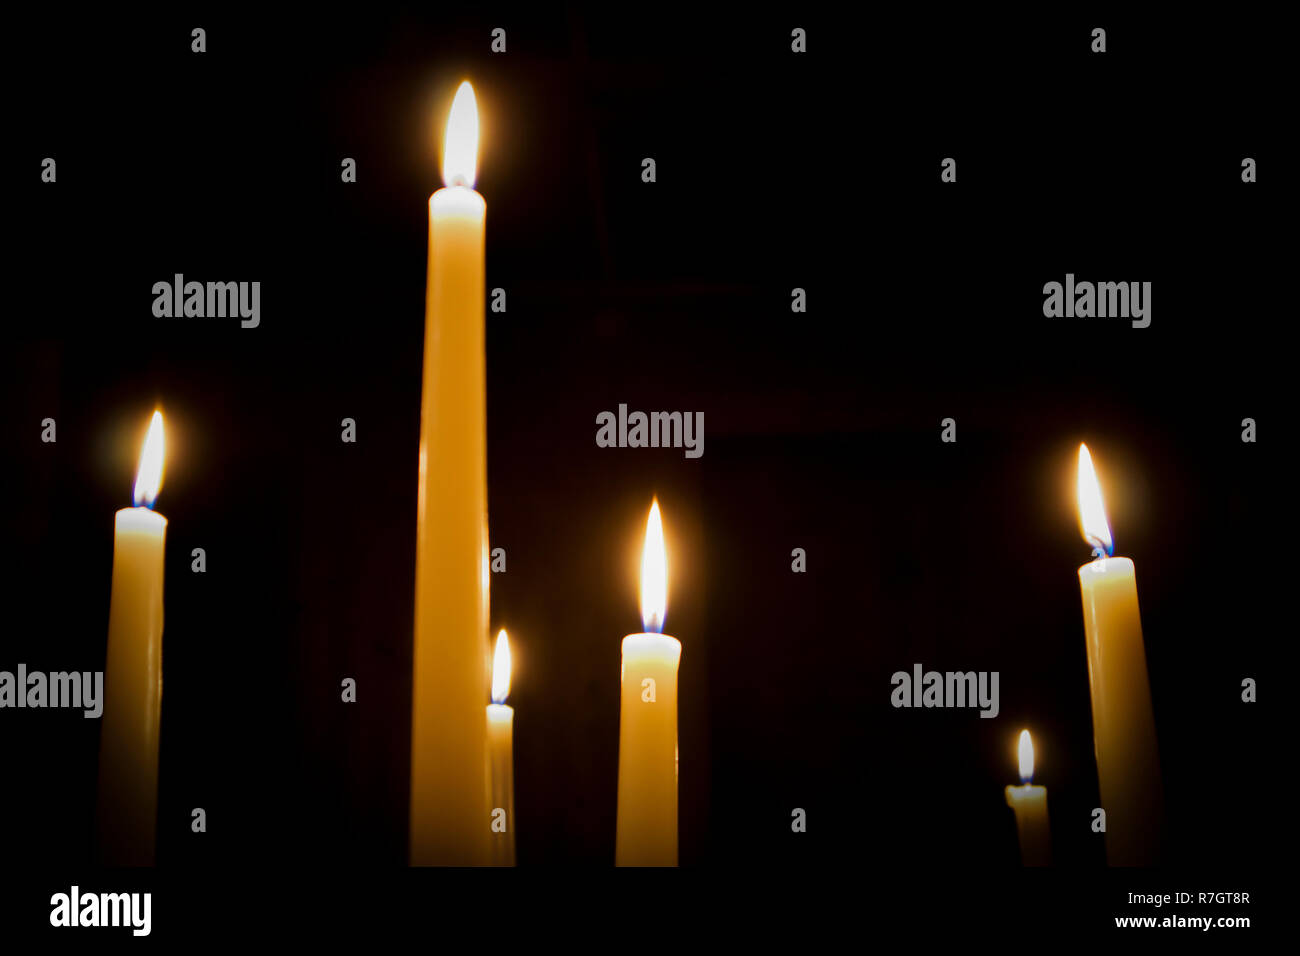 A number of burning melted candles with blurred forks of flame against dark background Stock Photo